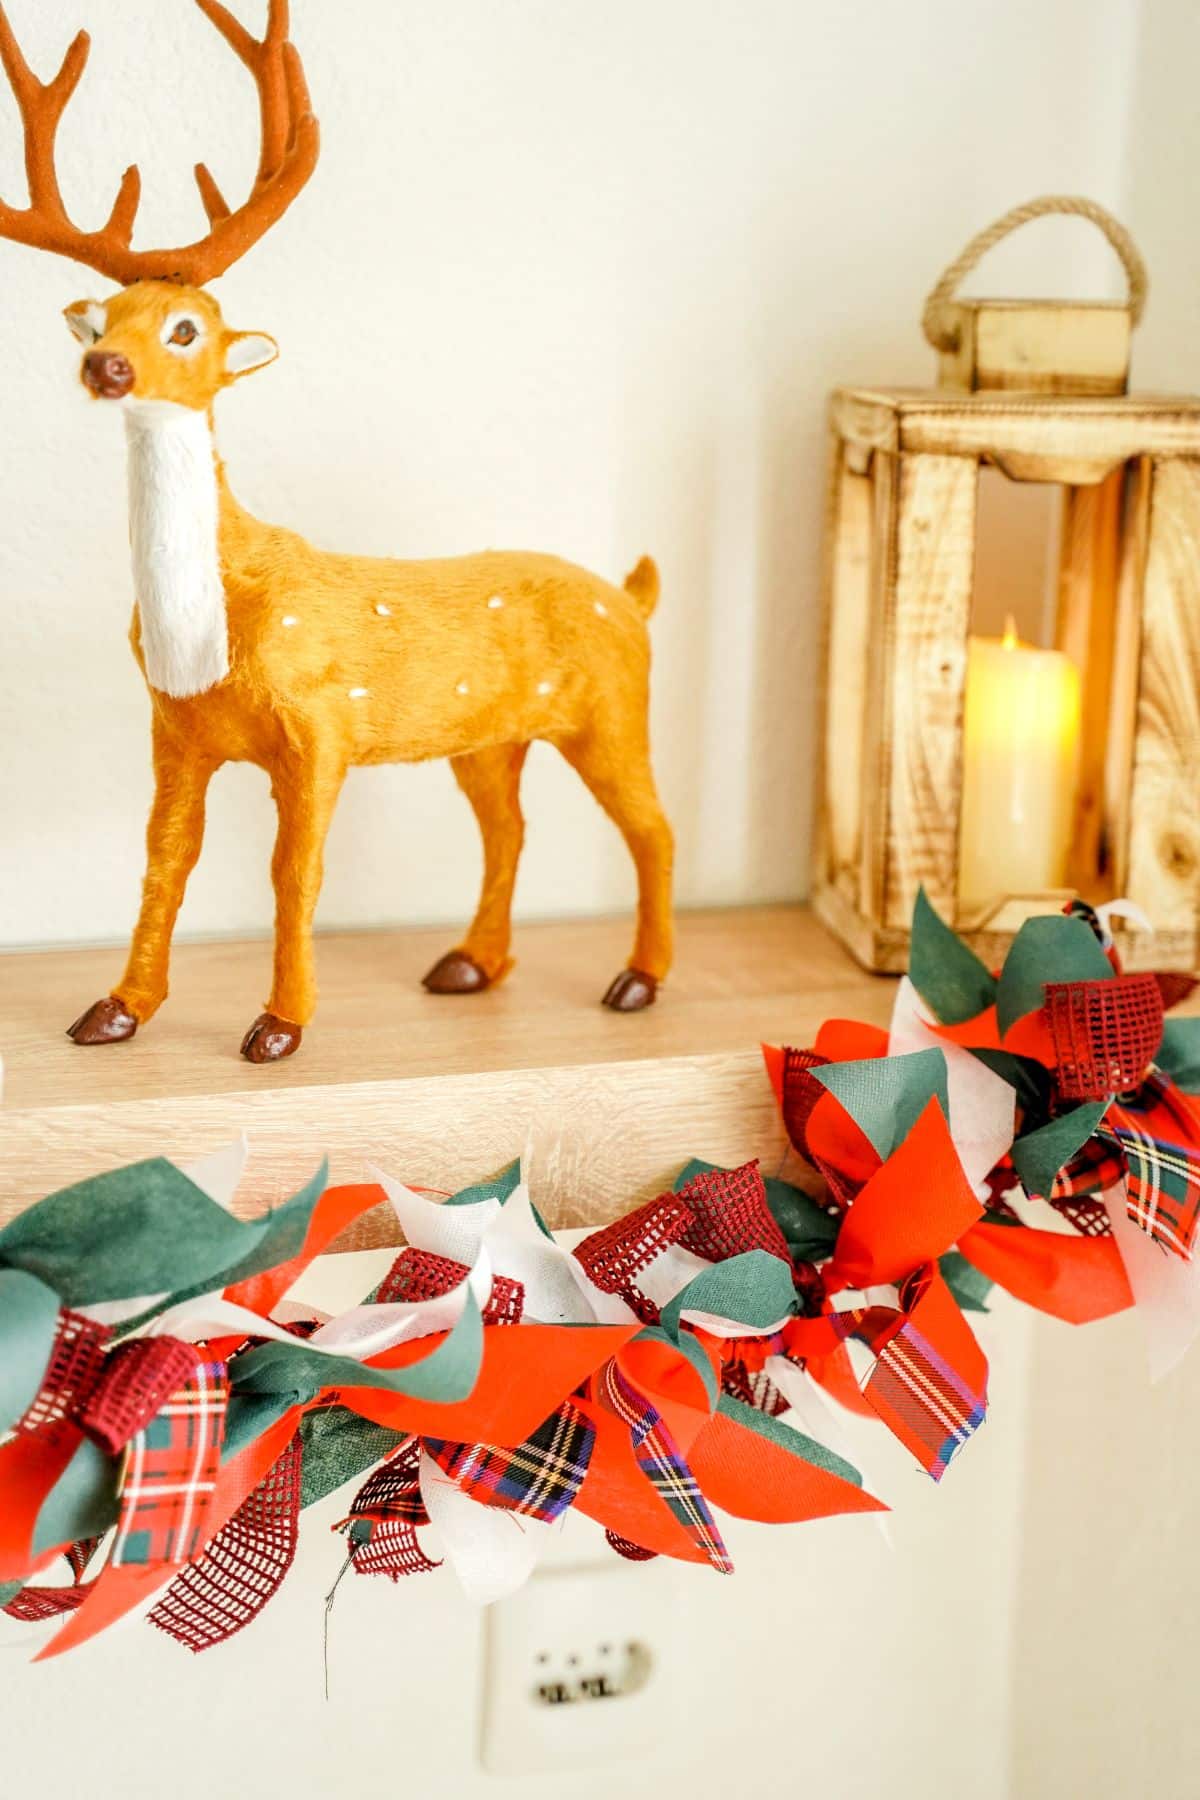 red, green, and white fabric garland hanging on shelf by fake deer and lantern